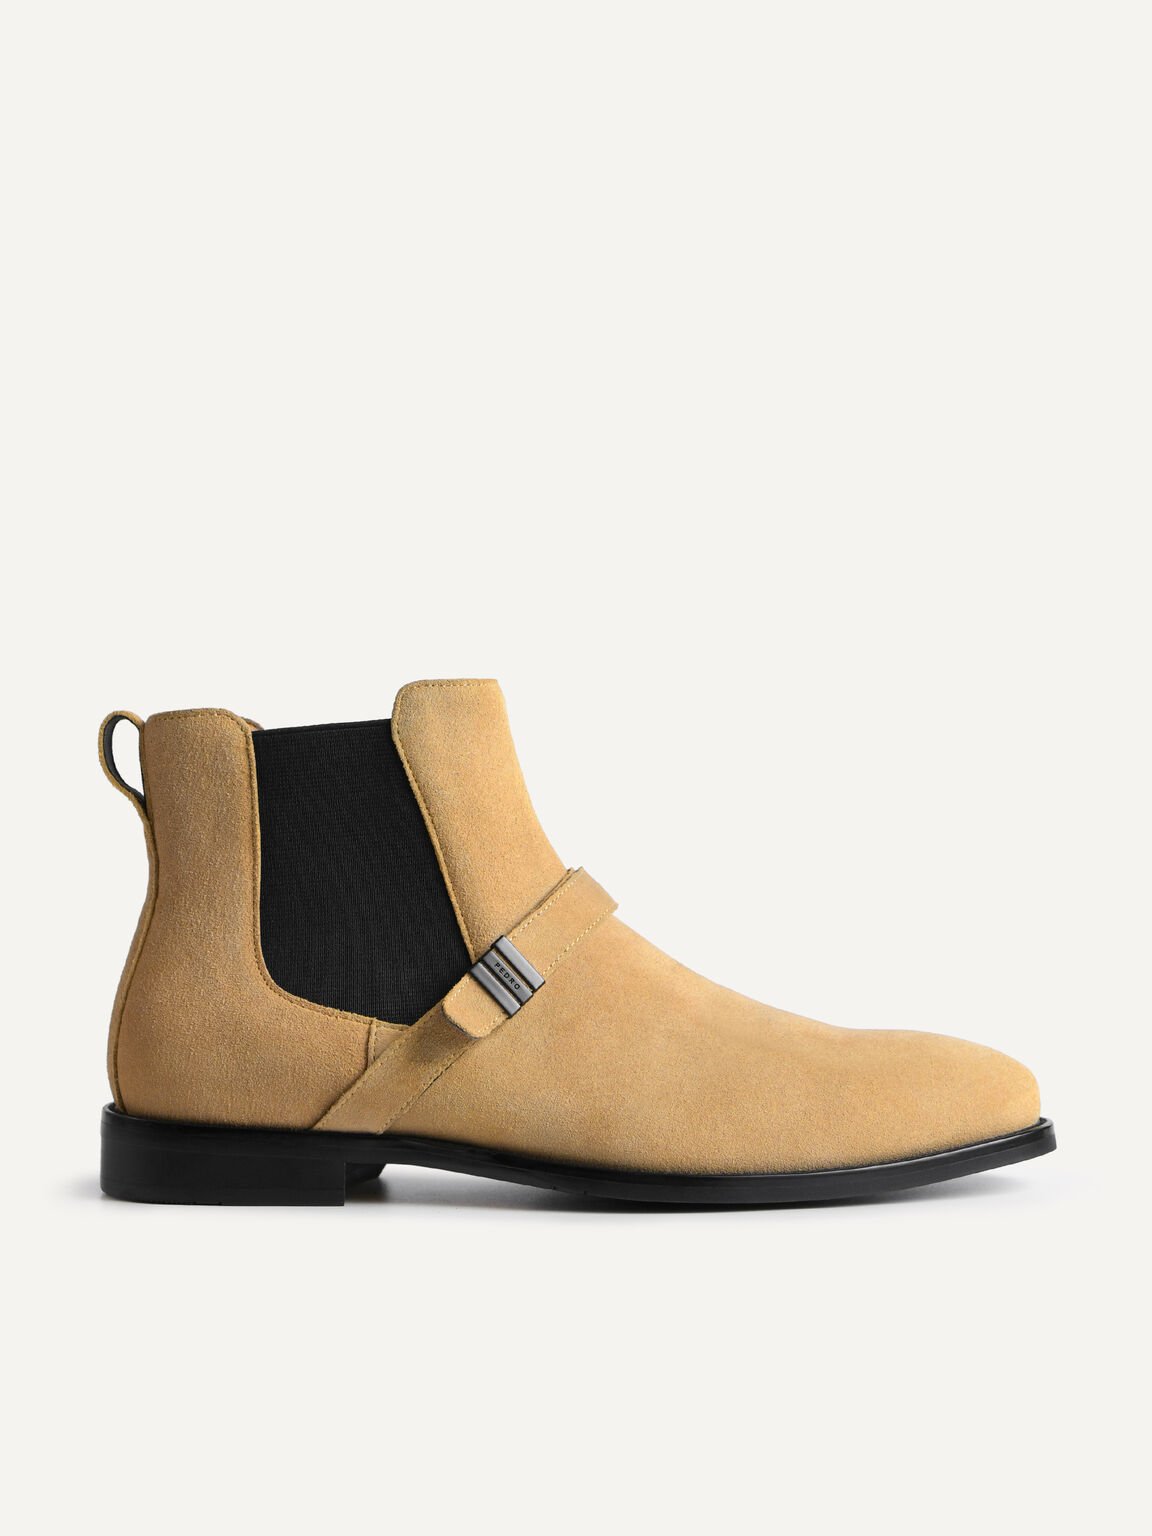 Brooklyn Leather Strapped Boots, Sand